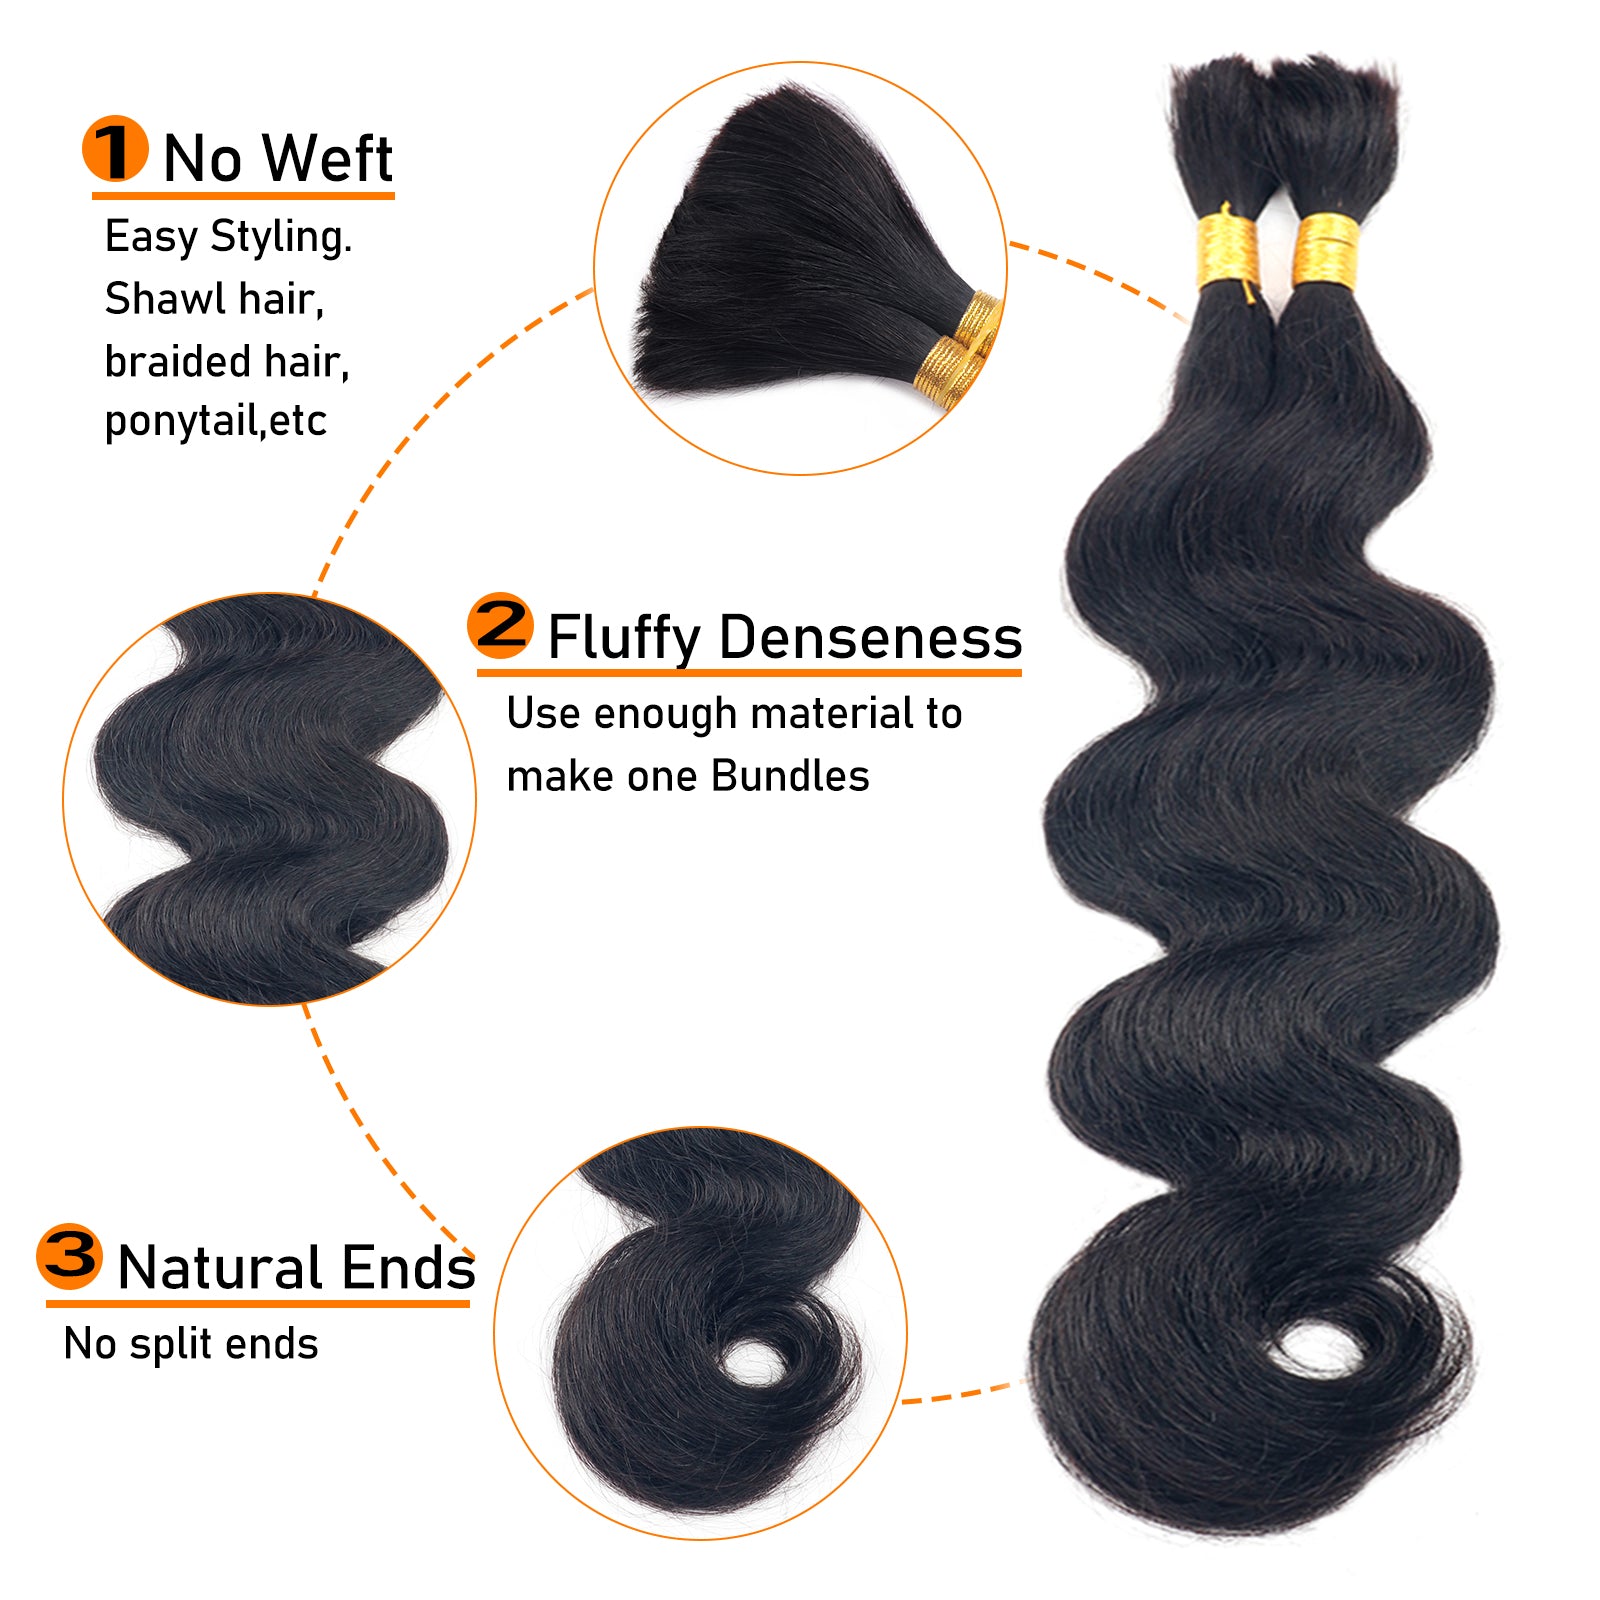 Sterly Body Wave Bulk Human Hair For Braiding No Weft 100g (1 Pack-2 Bundle 50g)